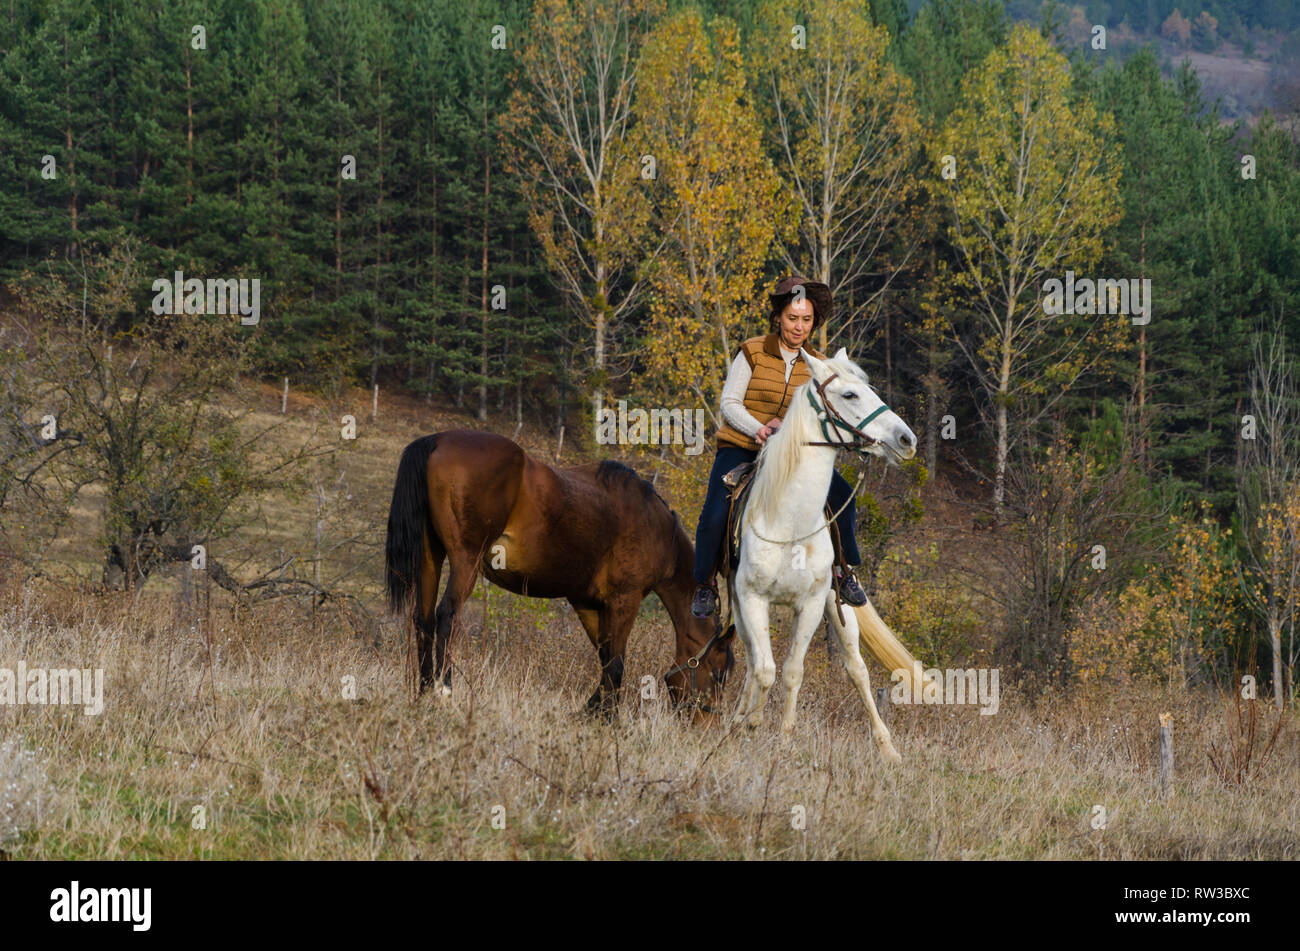 Kastamonu,TURKEY-November 05,2017: Woman is riding on a white horse in the forest.There's a brown horse next to her. Stock Photo